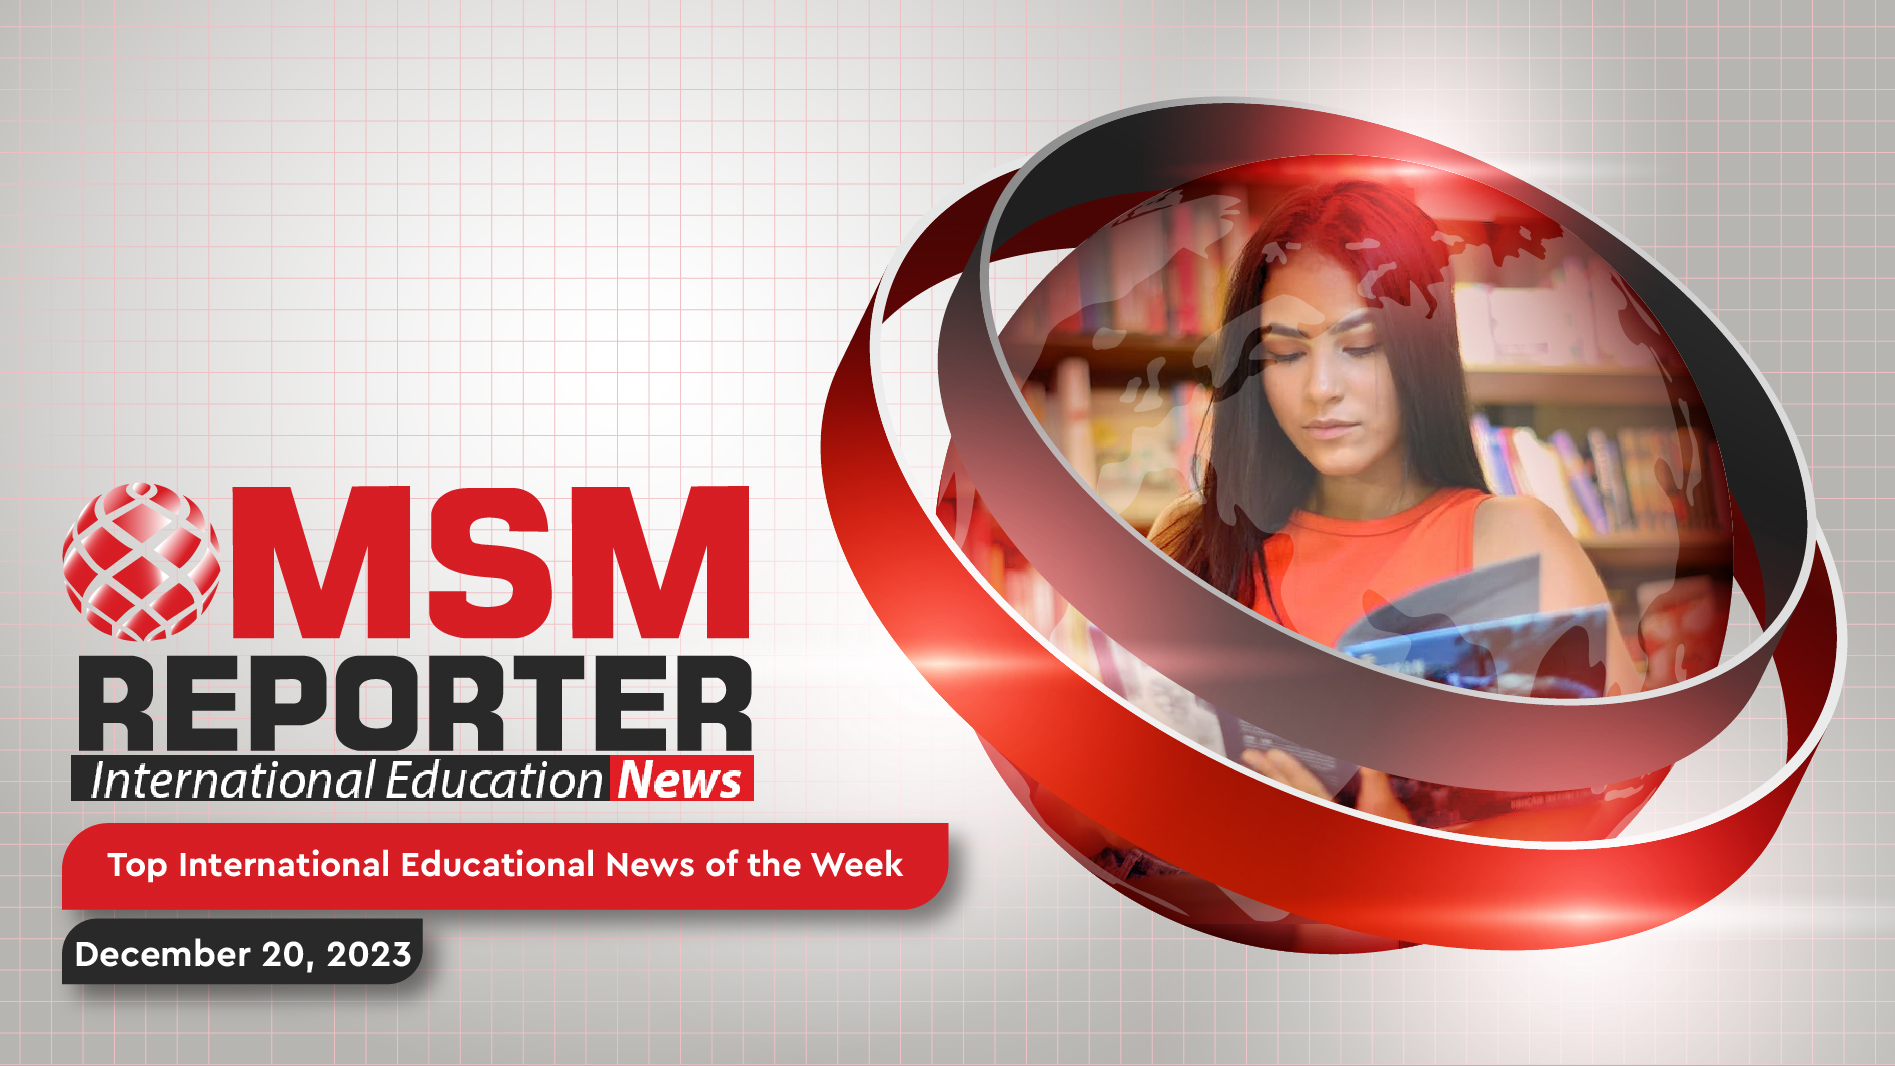 New French proficiency reqs in Canada, UK’s deregistration of foreign students, and more in this week’s MSM Reporter